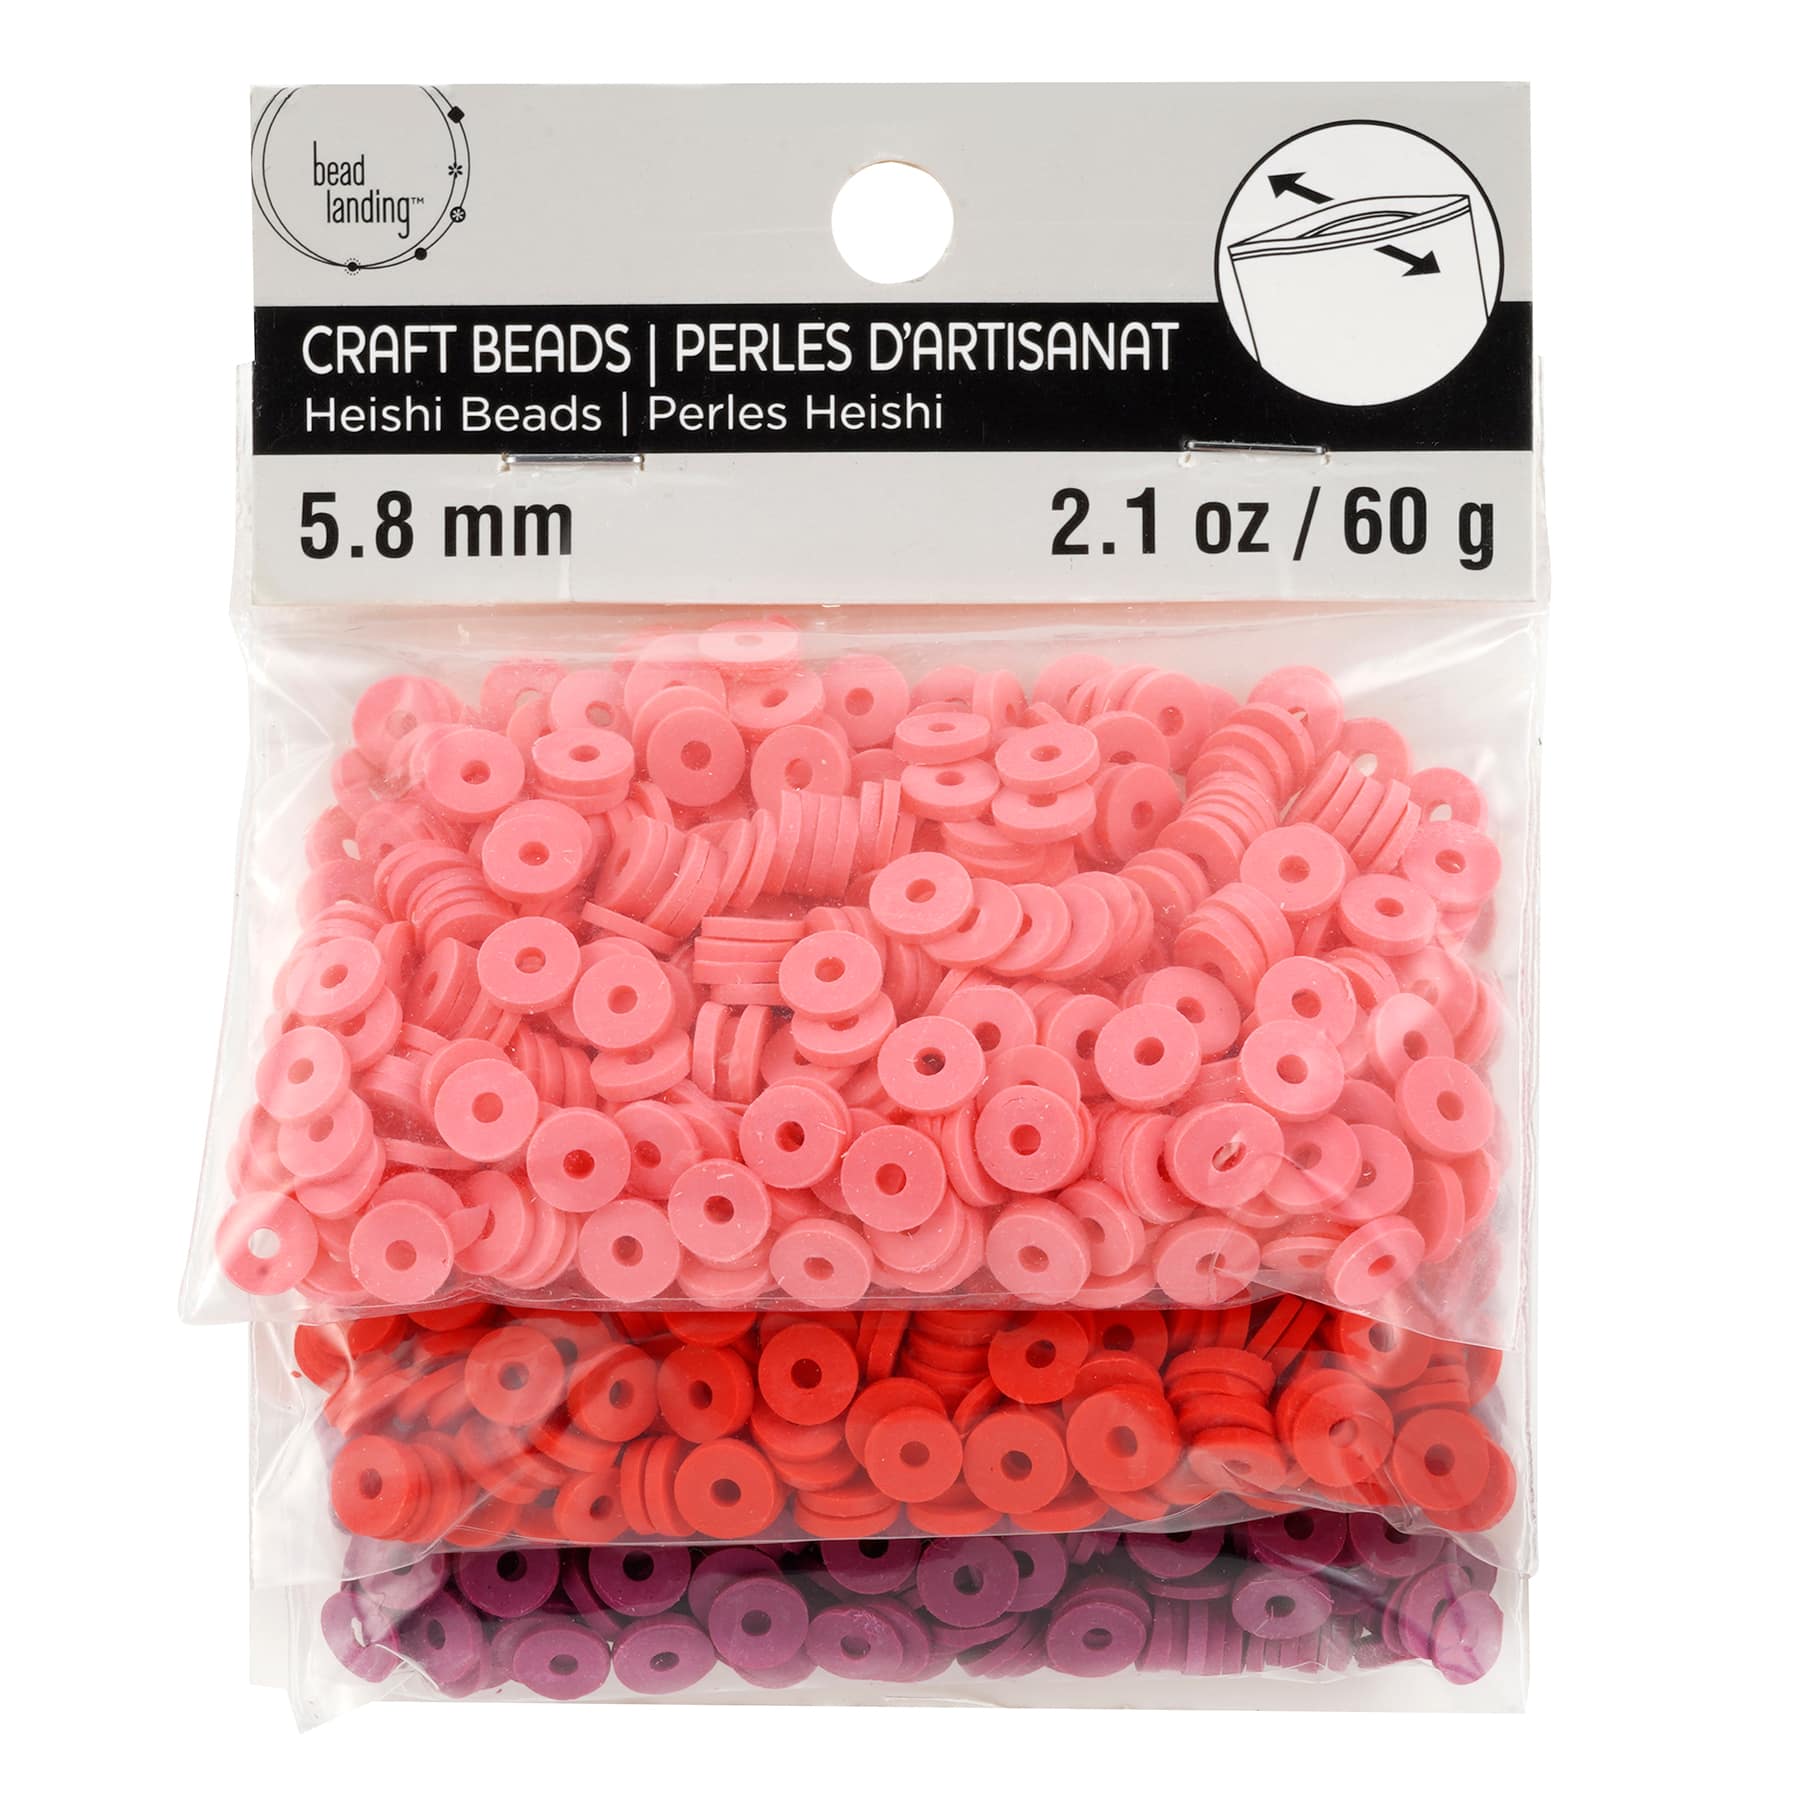 5.8mm PVC Heishi Craft Beads by Bead Landing in Red | Michaels